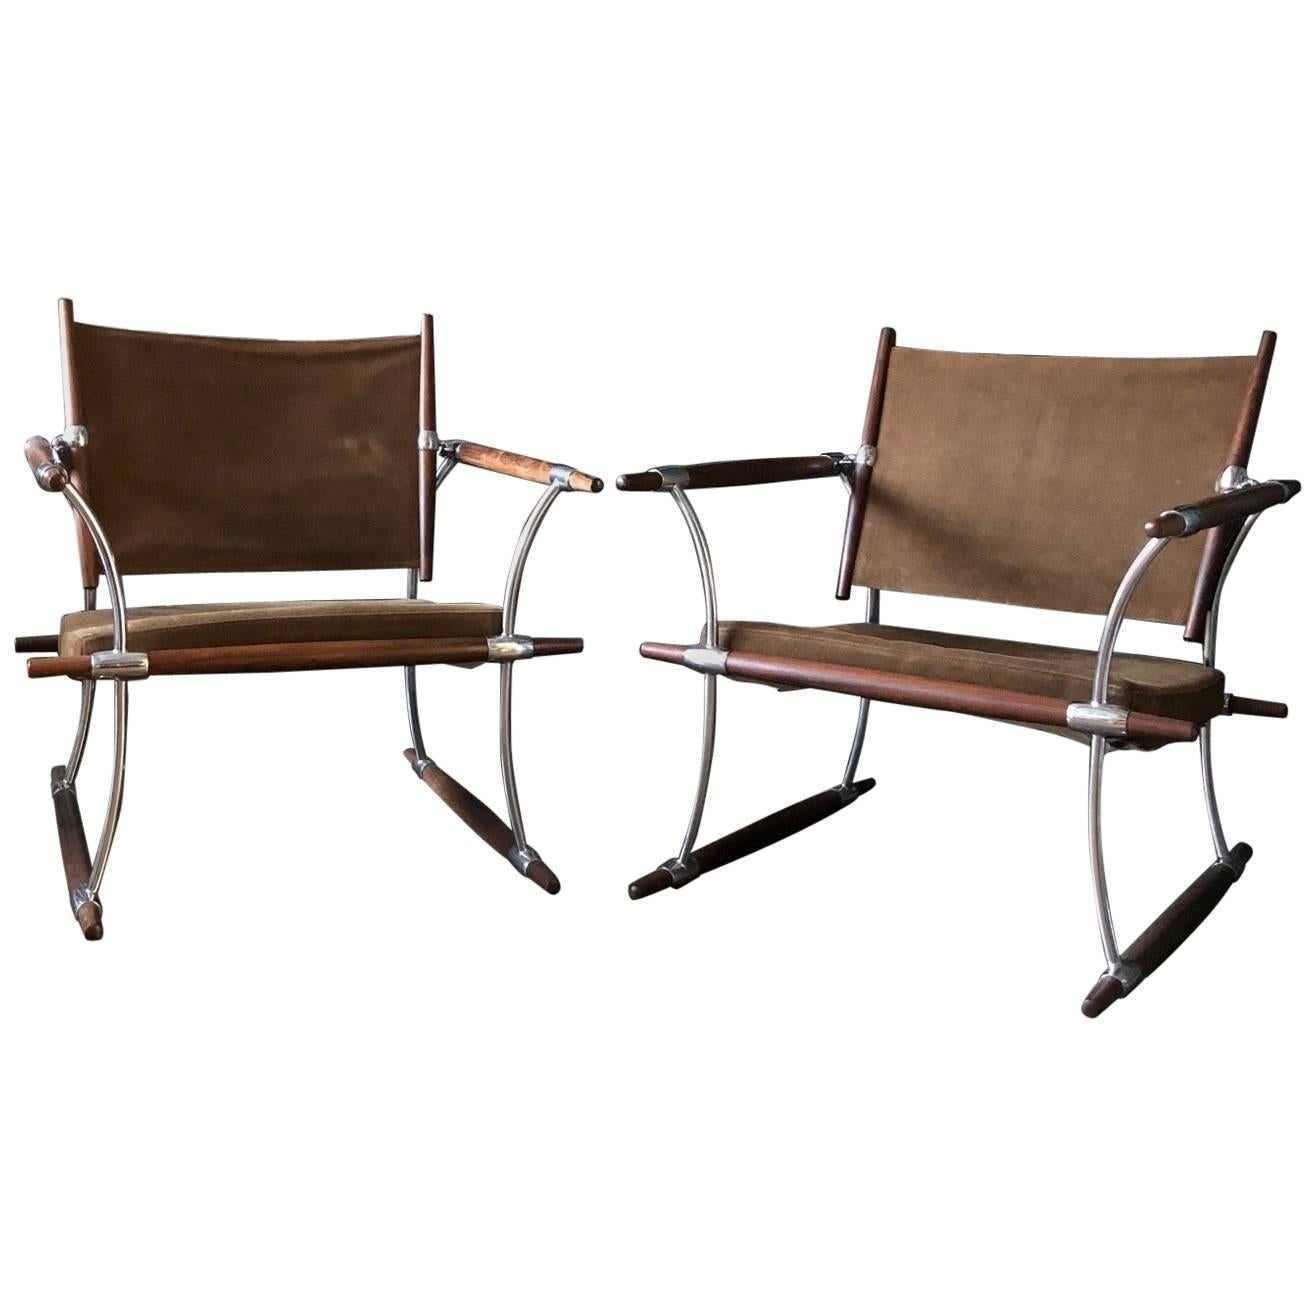 Pair of "Stokke" Chairs by Jens Quistgaard for Nissen